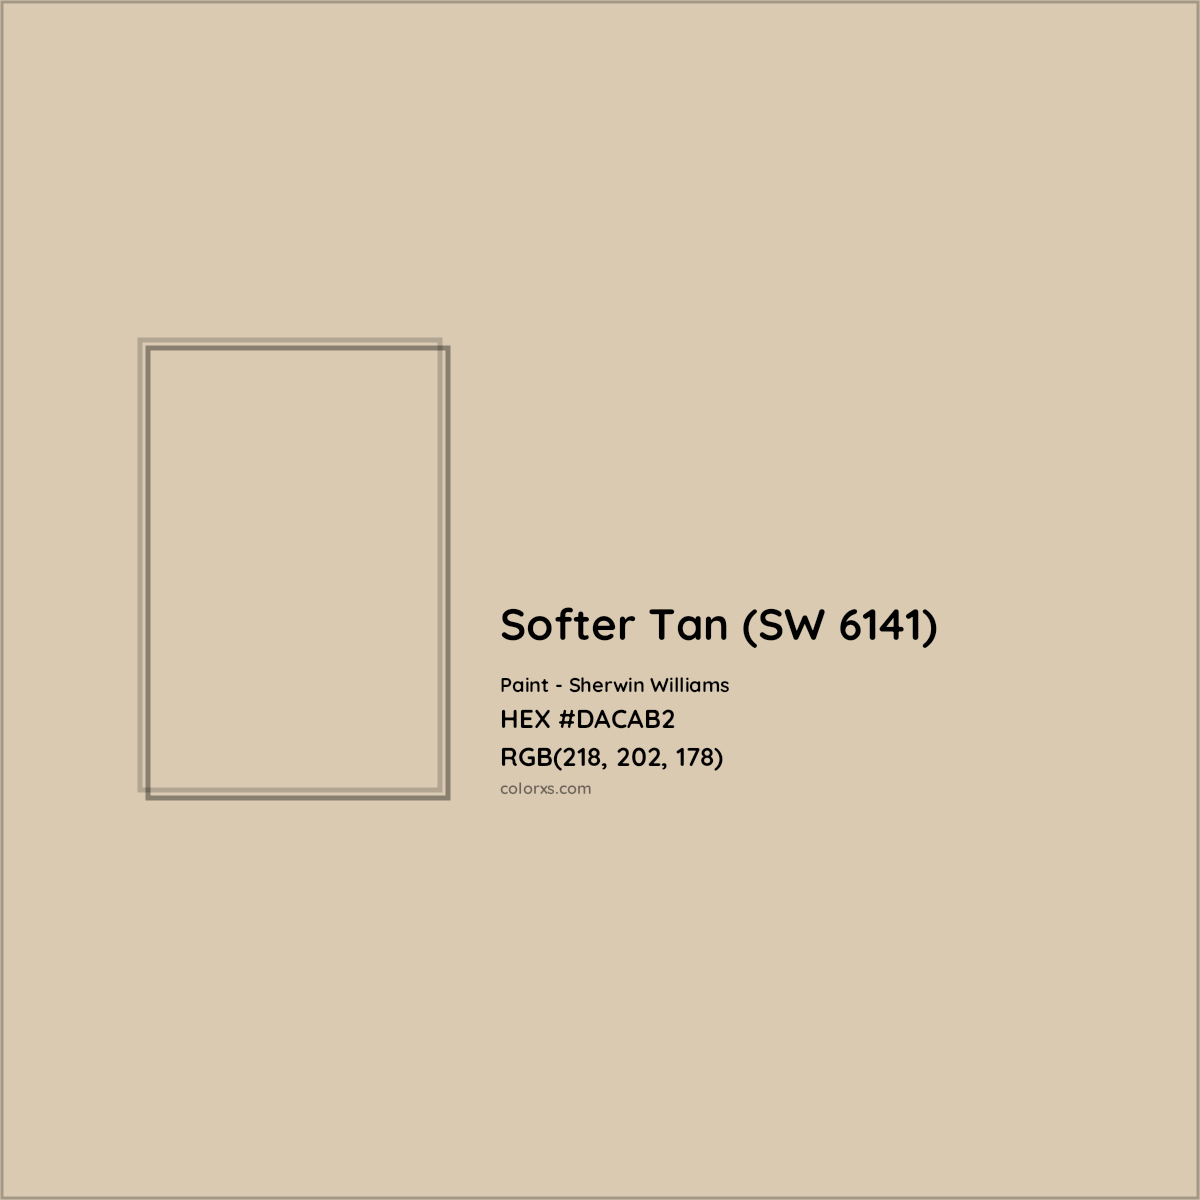 HEX #DACAB2 Softer Tan (SW 6141) Paint Sherwin Williams - Color Code